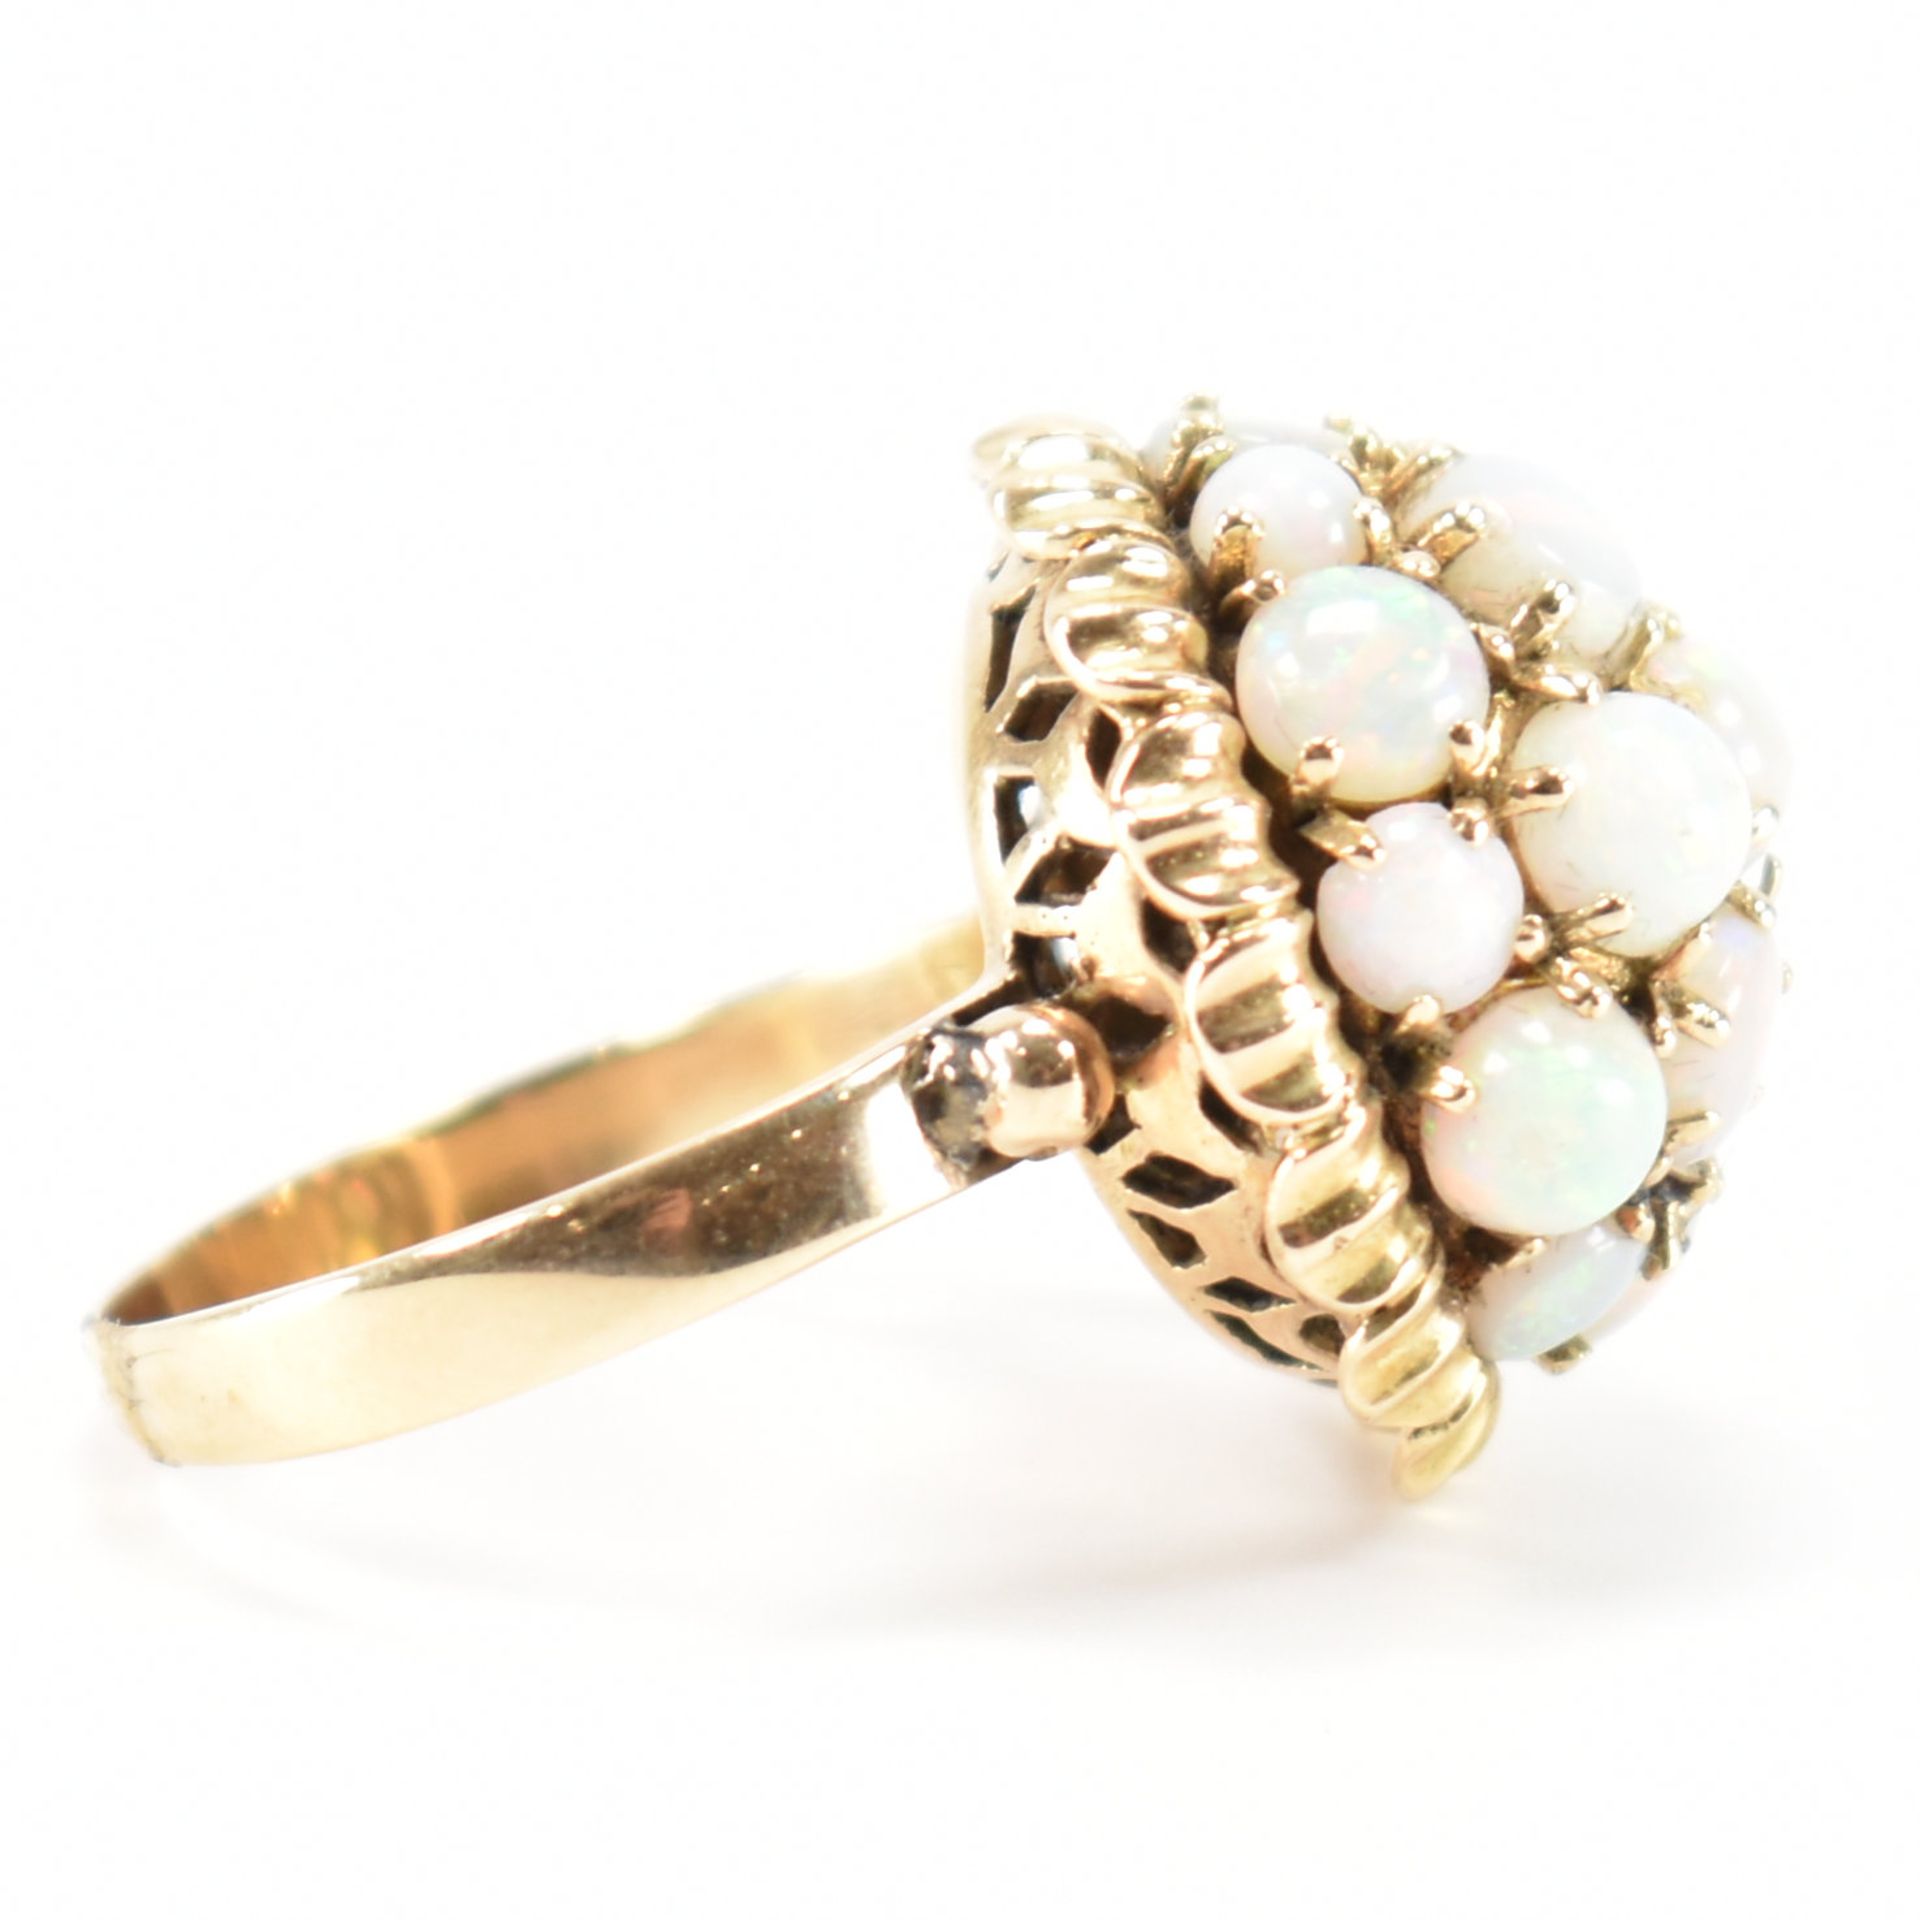 VINTAGE GOLD & OPAL BOMBE RING - Image 5 of 11